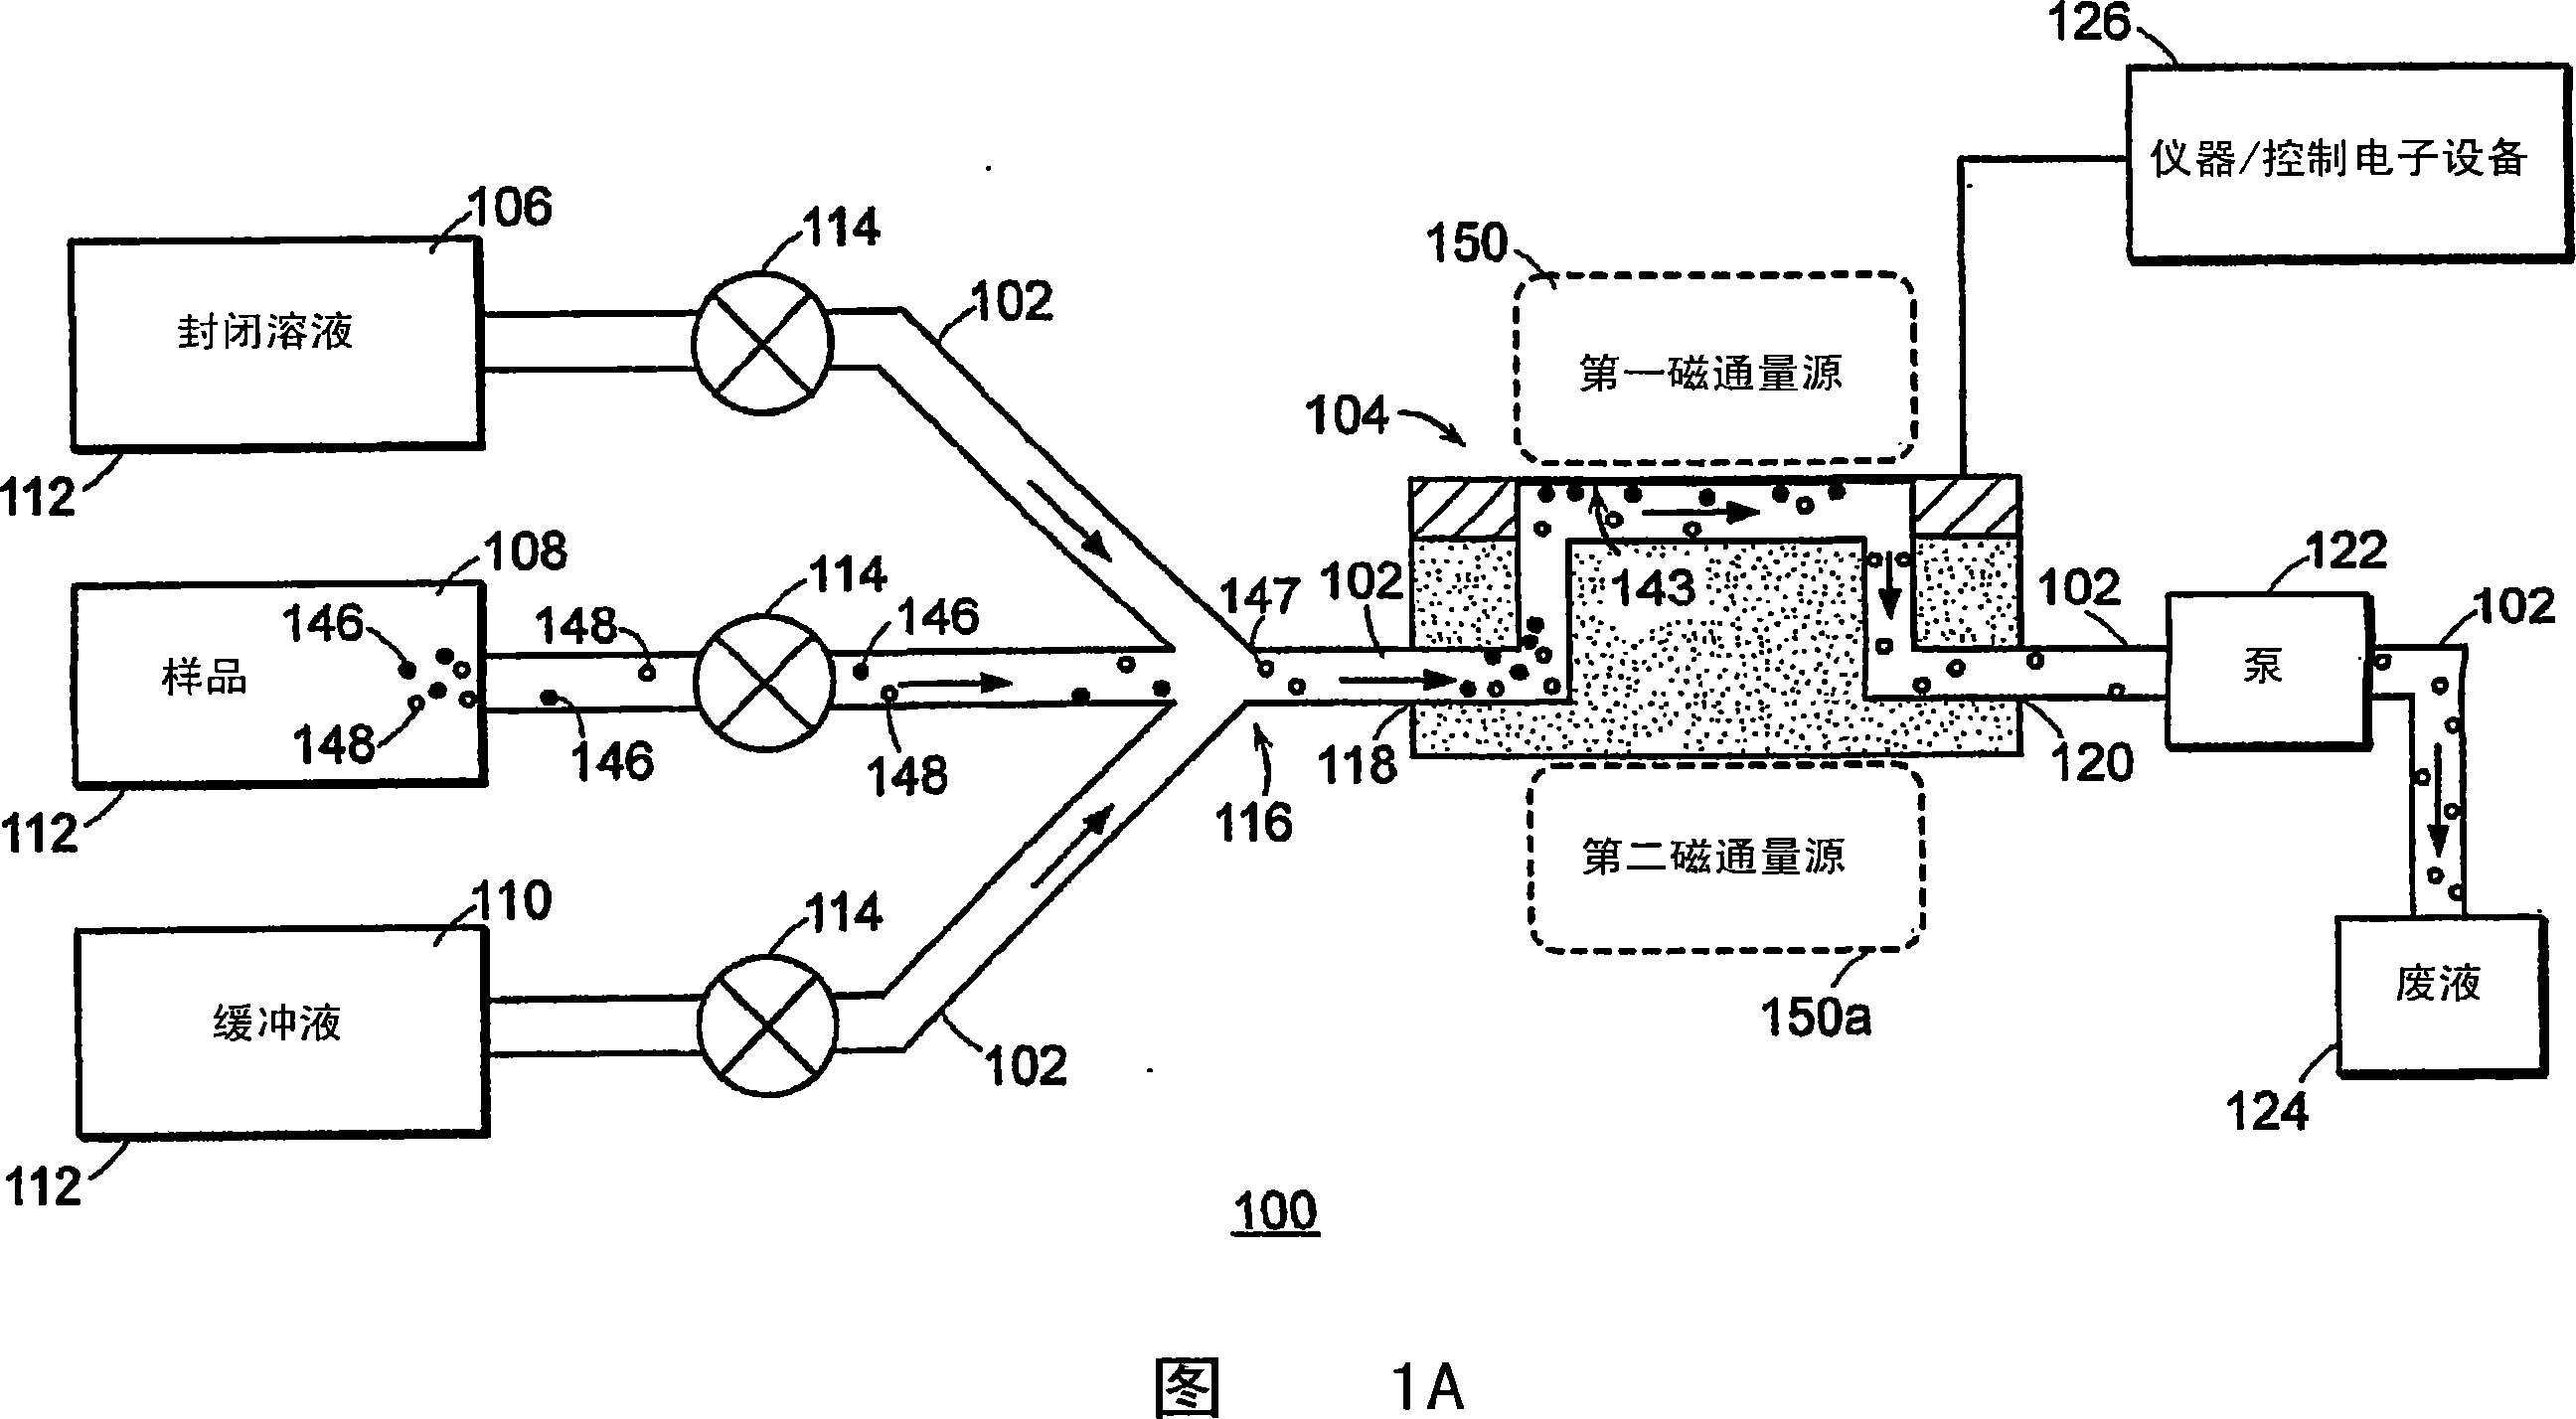 Method and apparatus for detecting analytes using an acoustic device